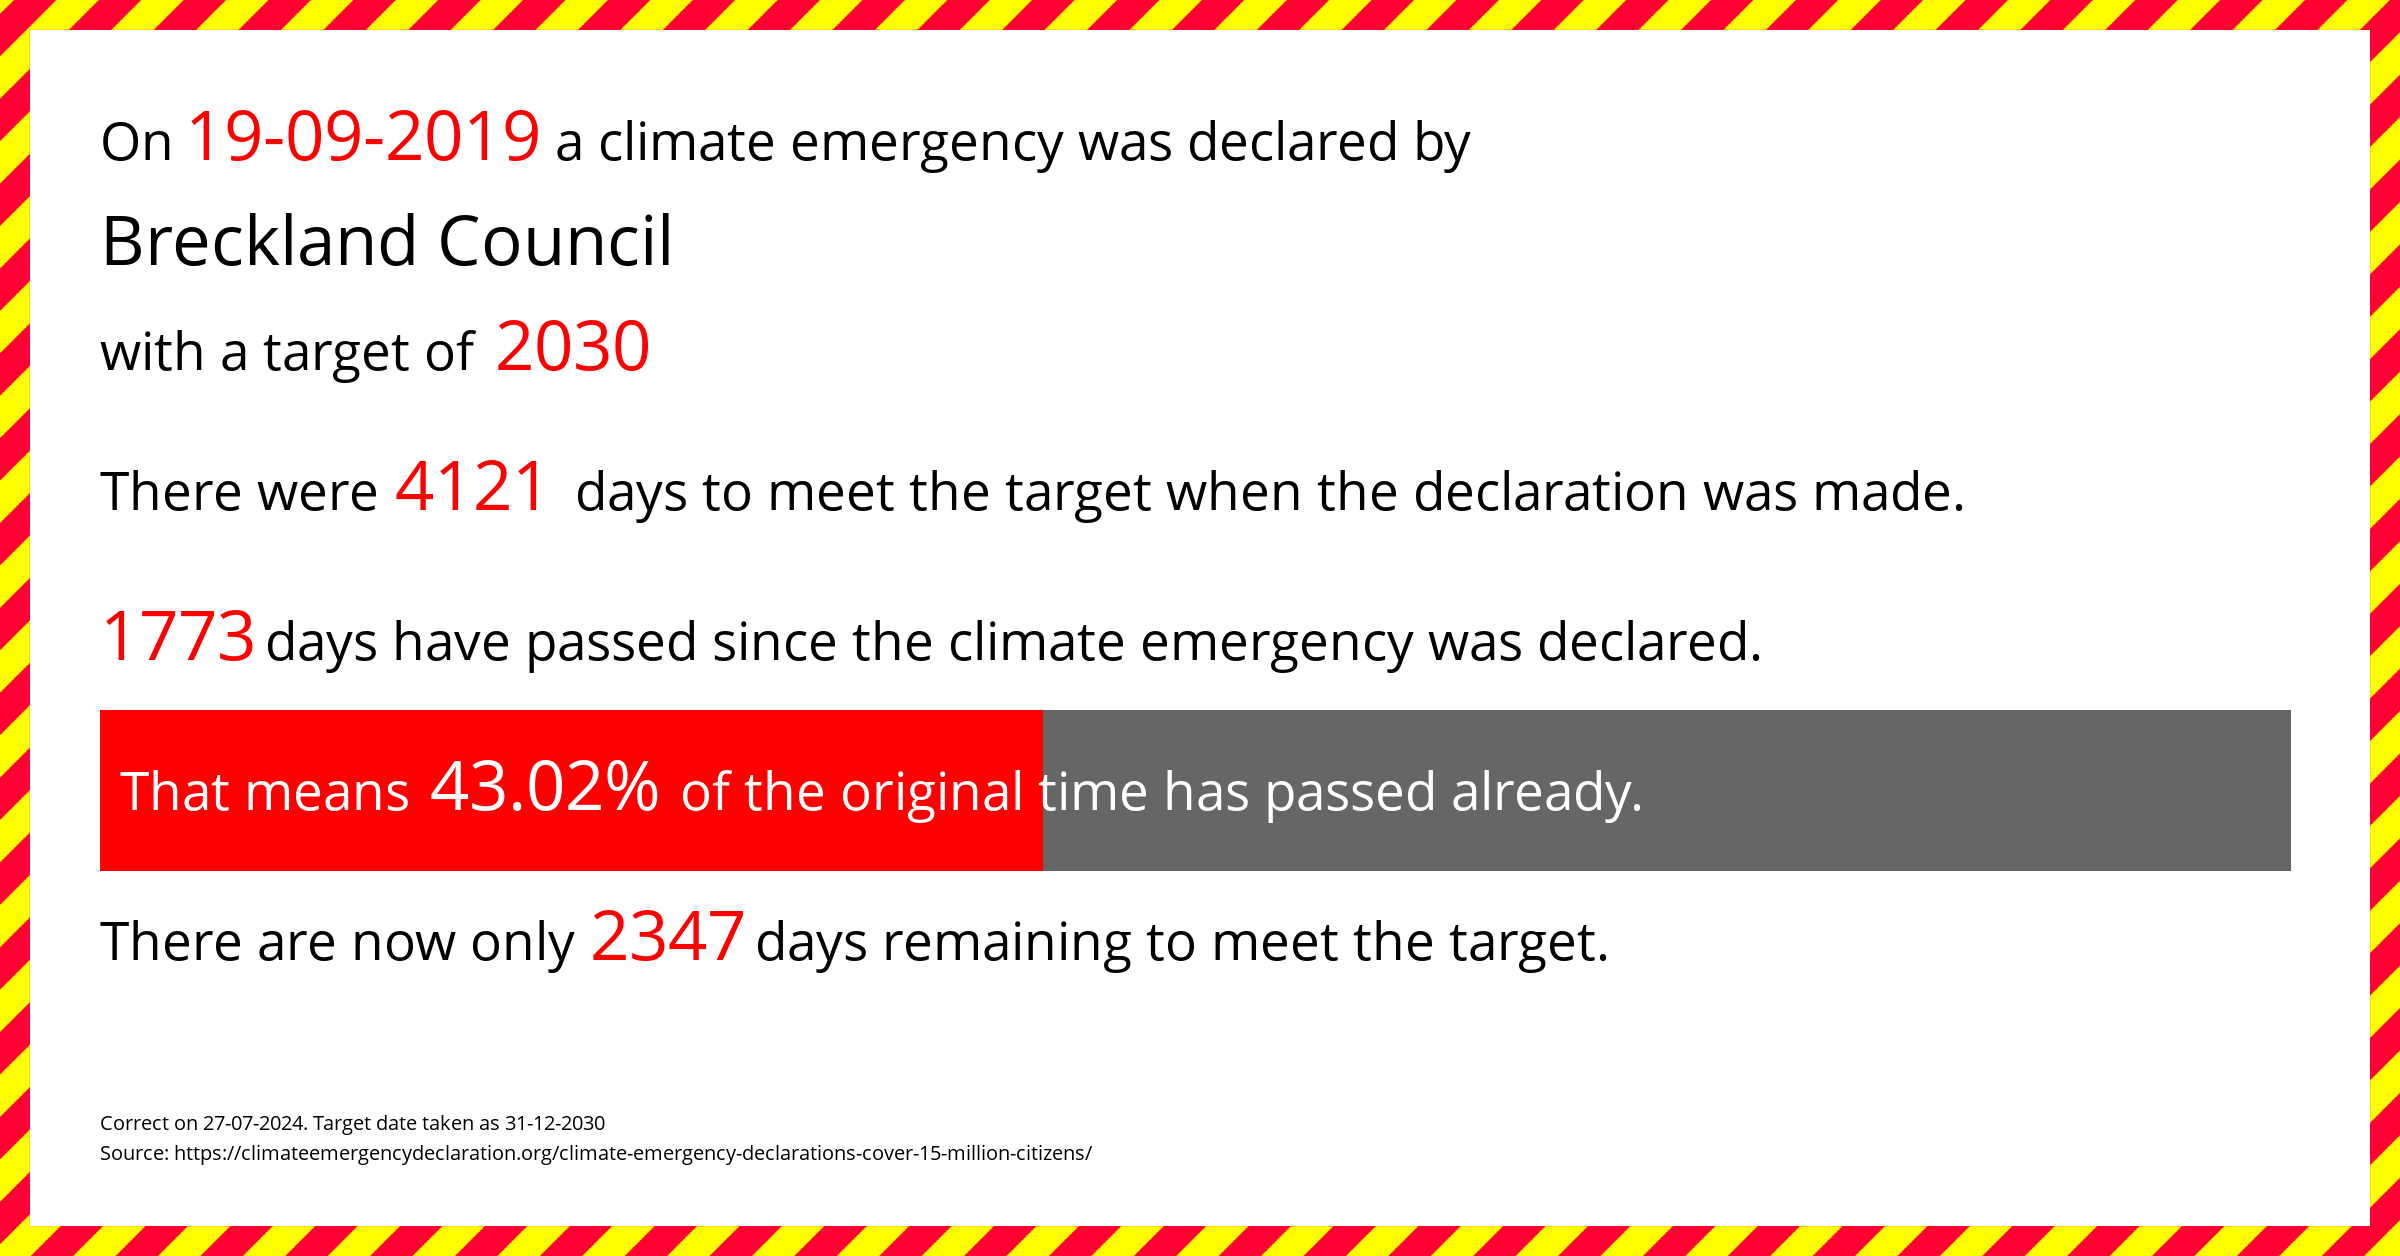 Breckland Council declared a Climate emergency on Thursday 19th September 2019, with a target of 2030.